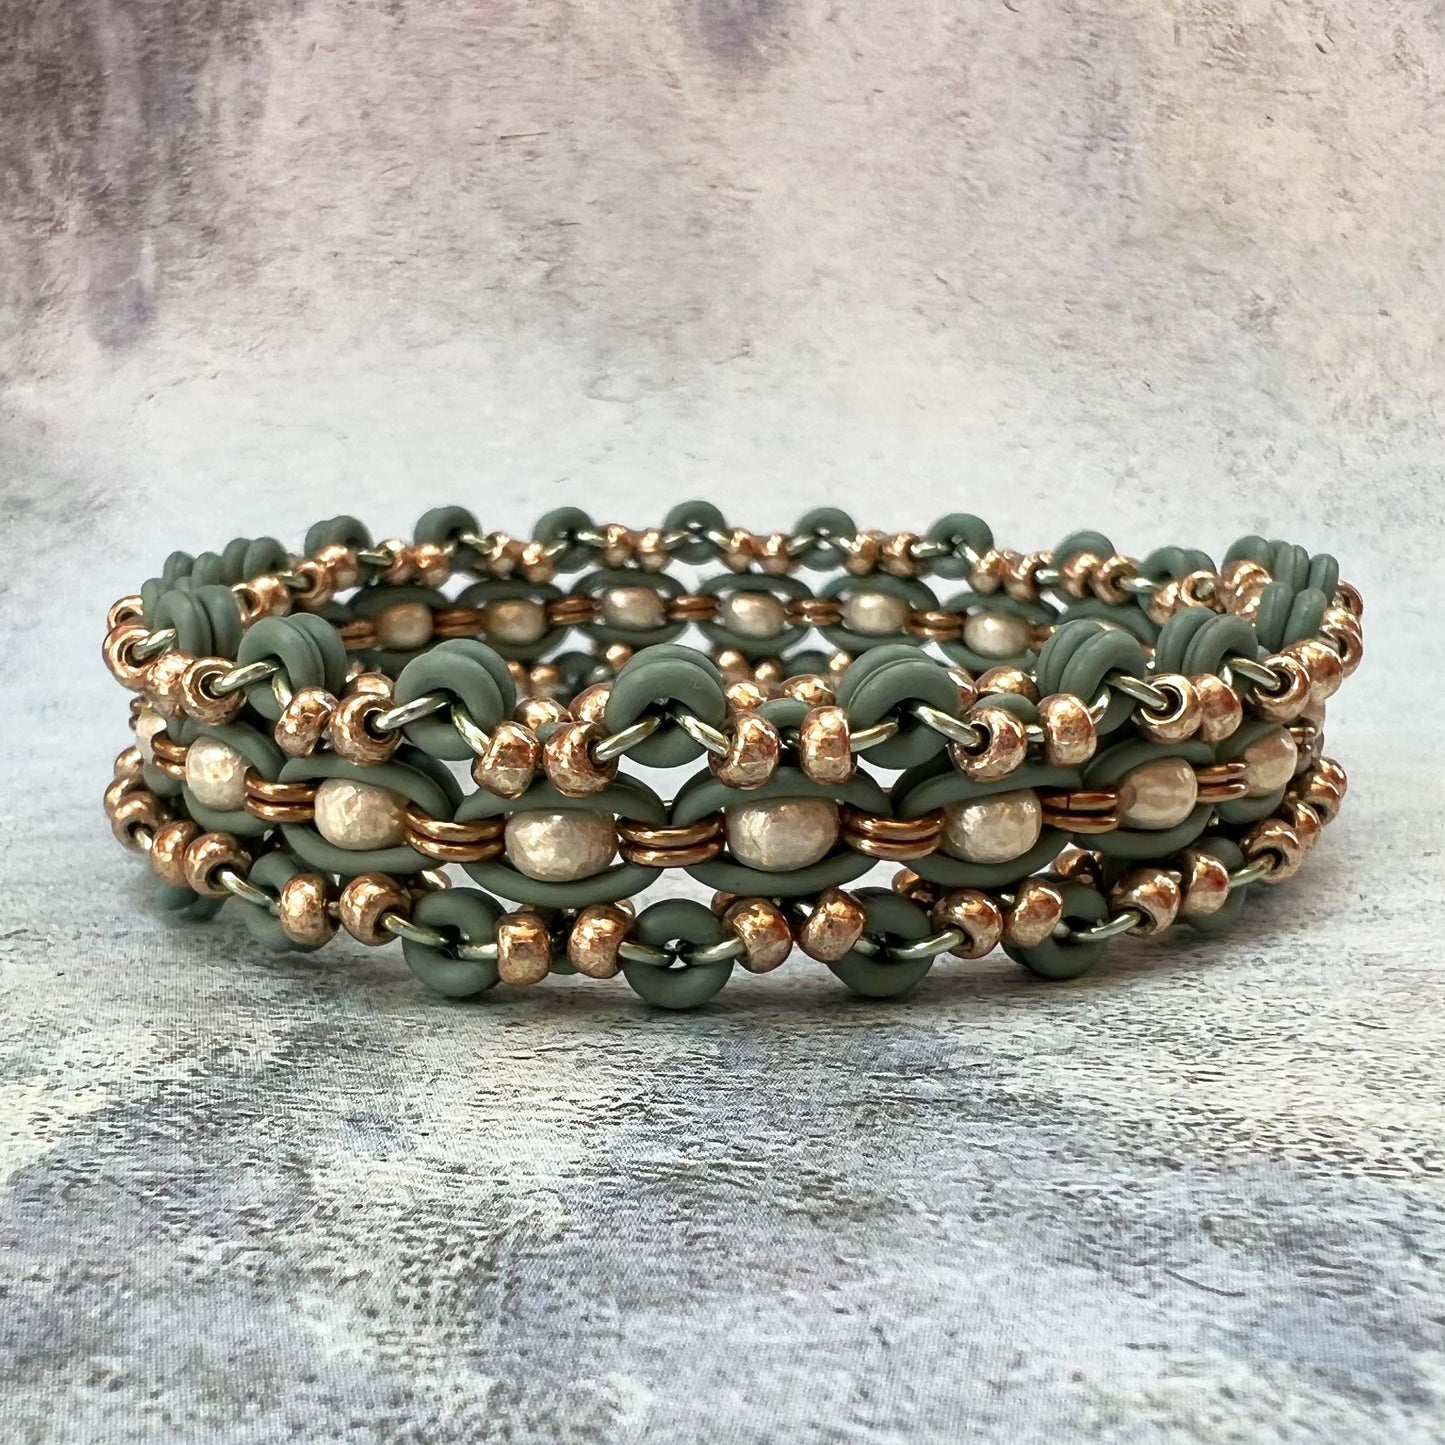 Lacy Geometric Beaded Stretch Bracelet Kit with Video Class - Dusky Sage, Pearl & Champagne